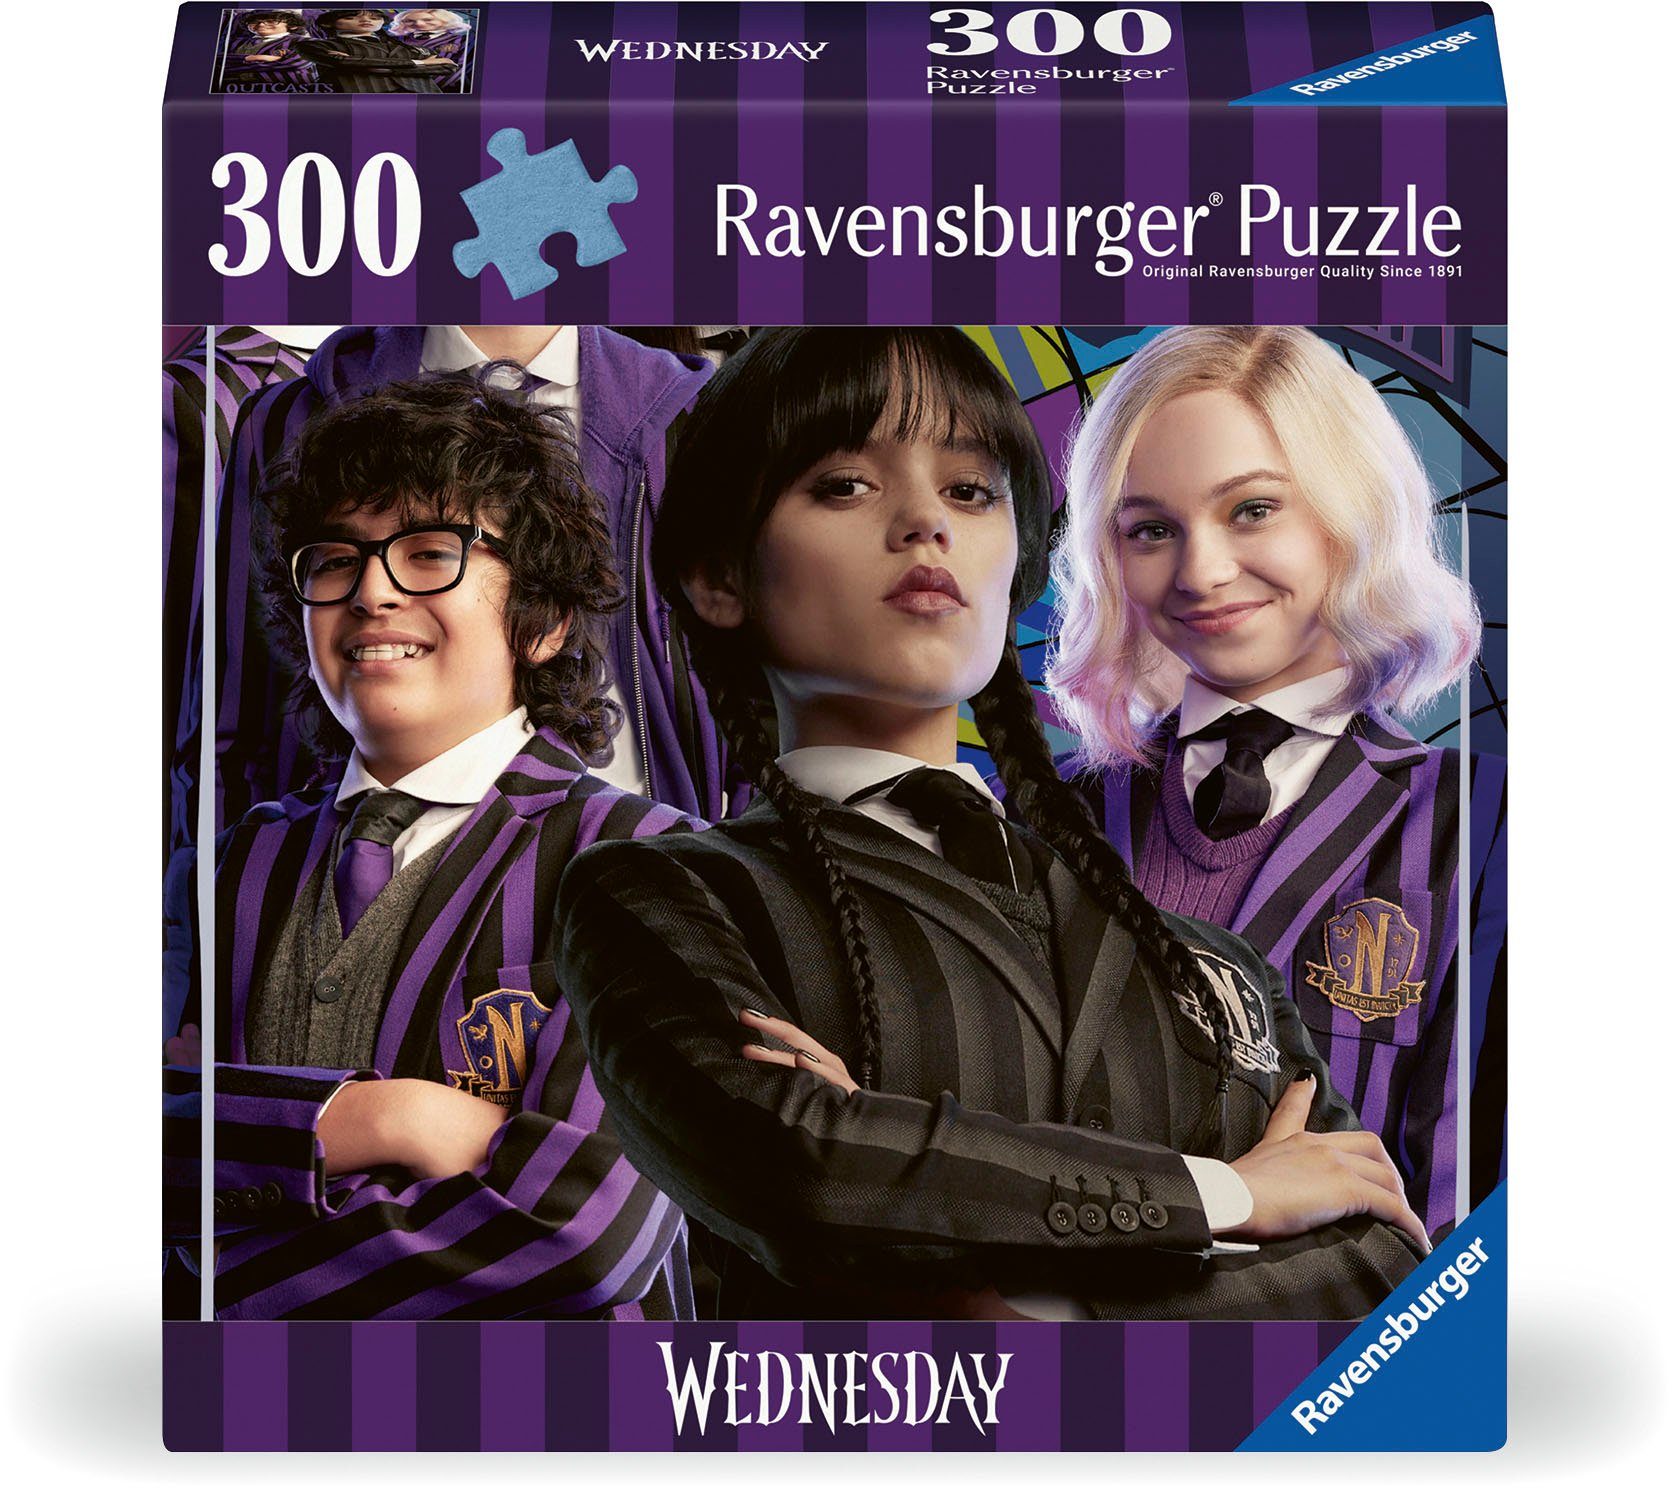 Ravensburger Puzzle Wednesday, Outcasts are in, 300 Puzzleteile, Made in Europe | Puzzle